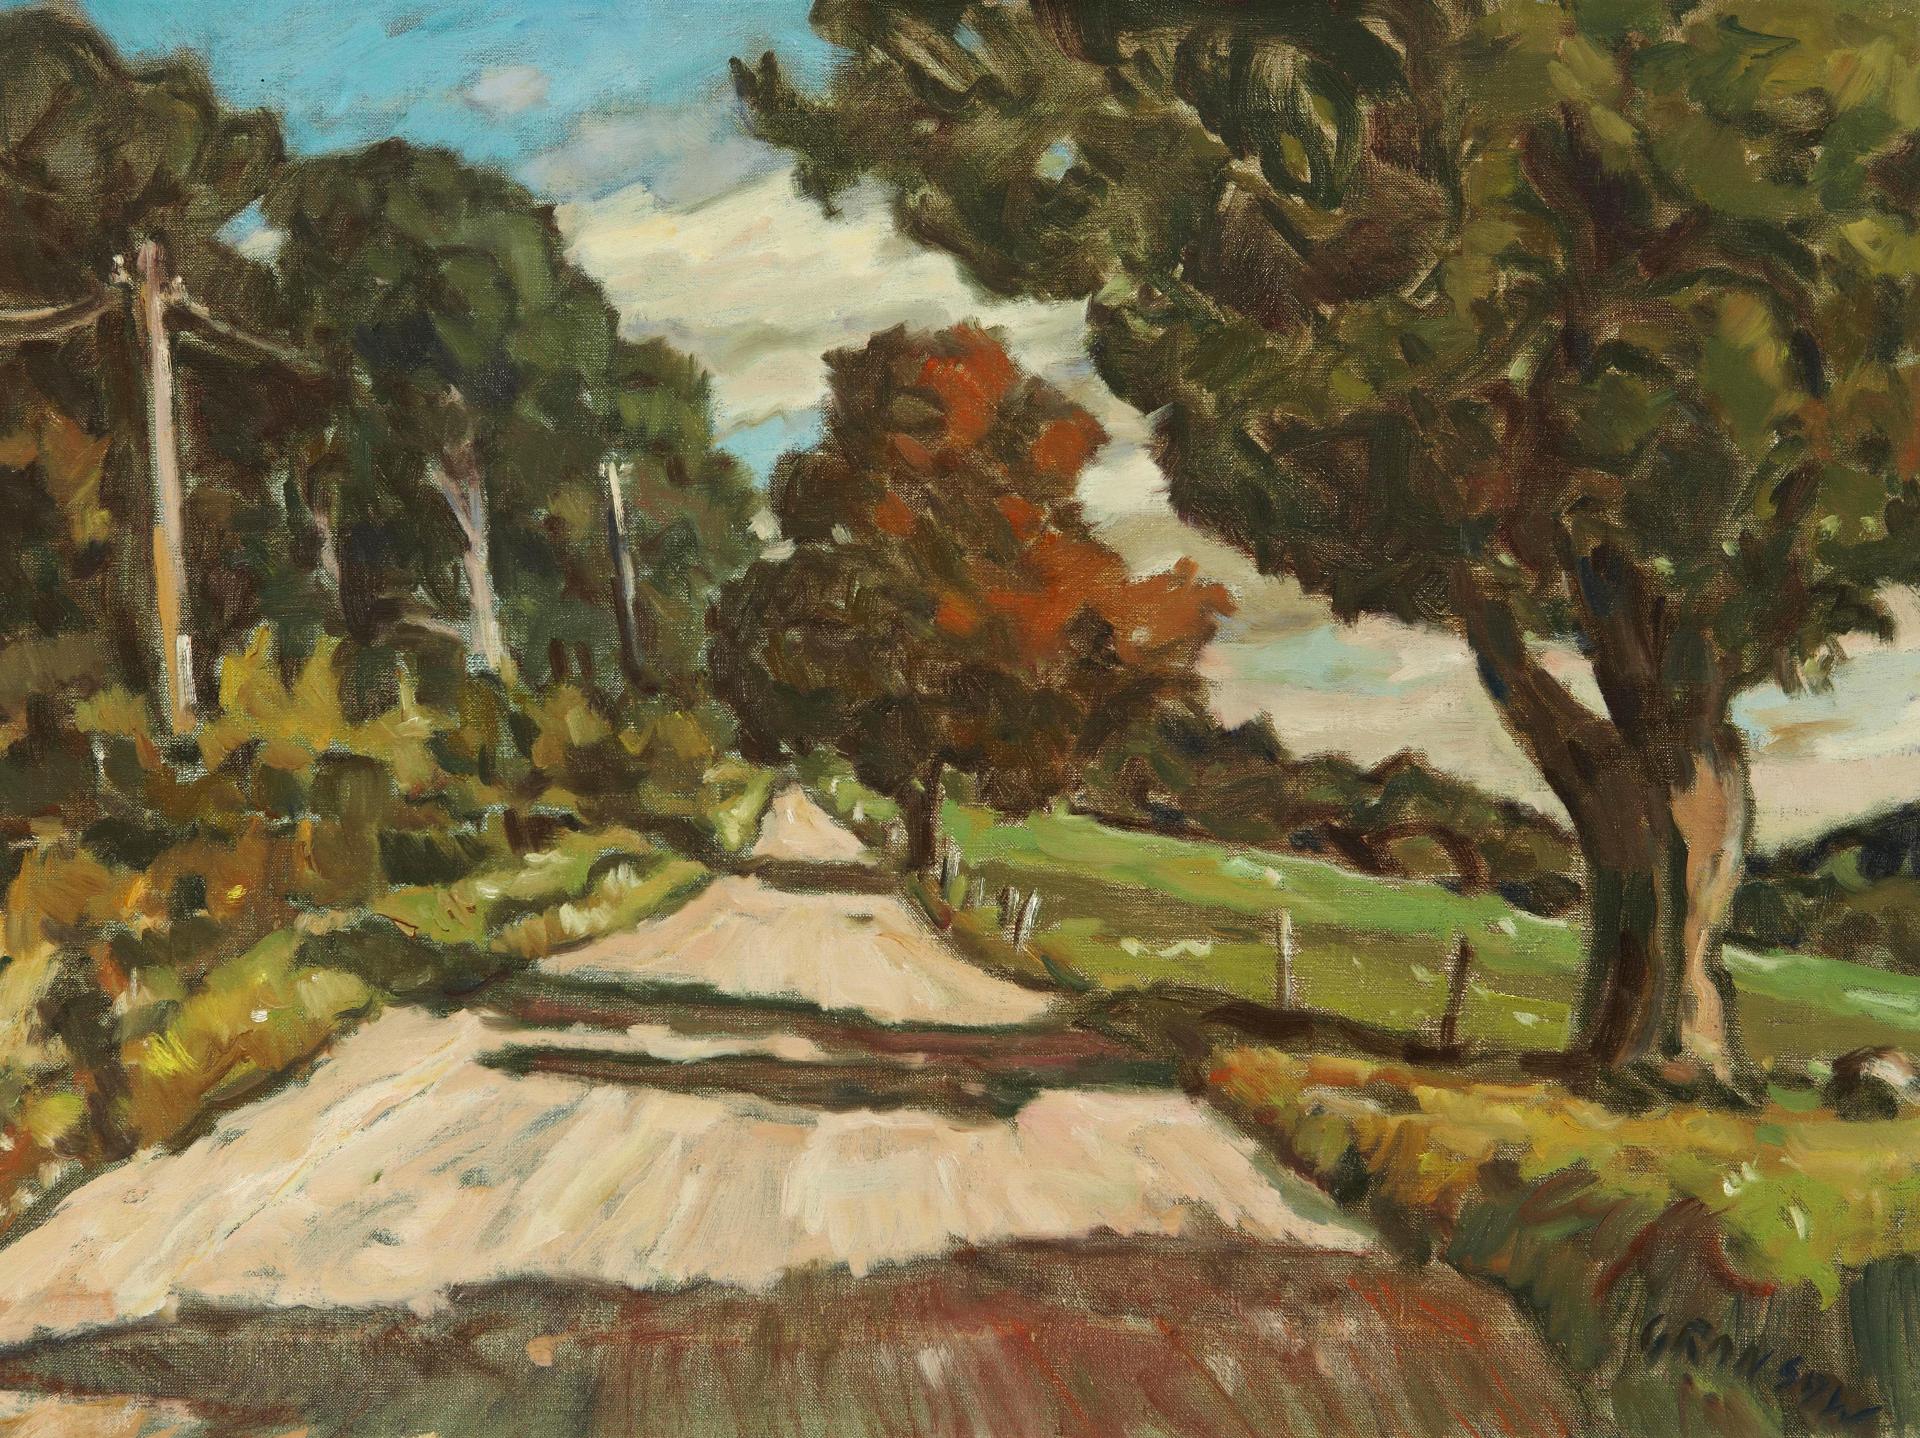 Helmut Gransow (1921-2012) - Summer Road, Eastern Township